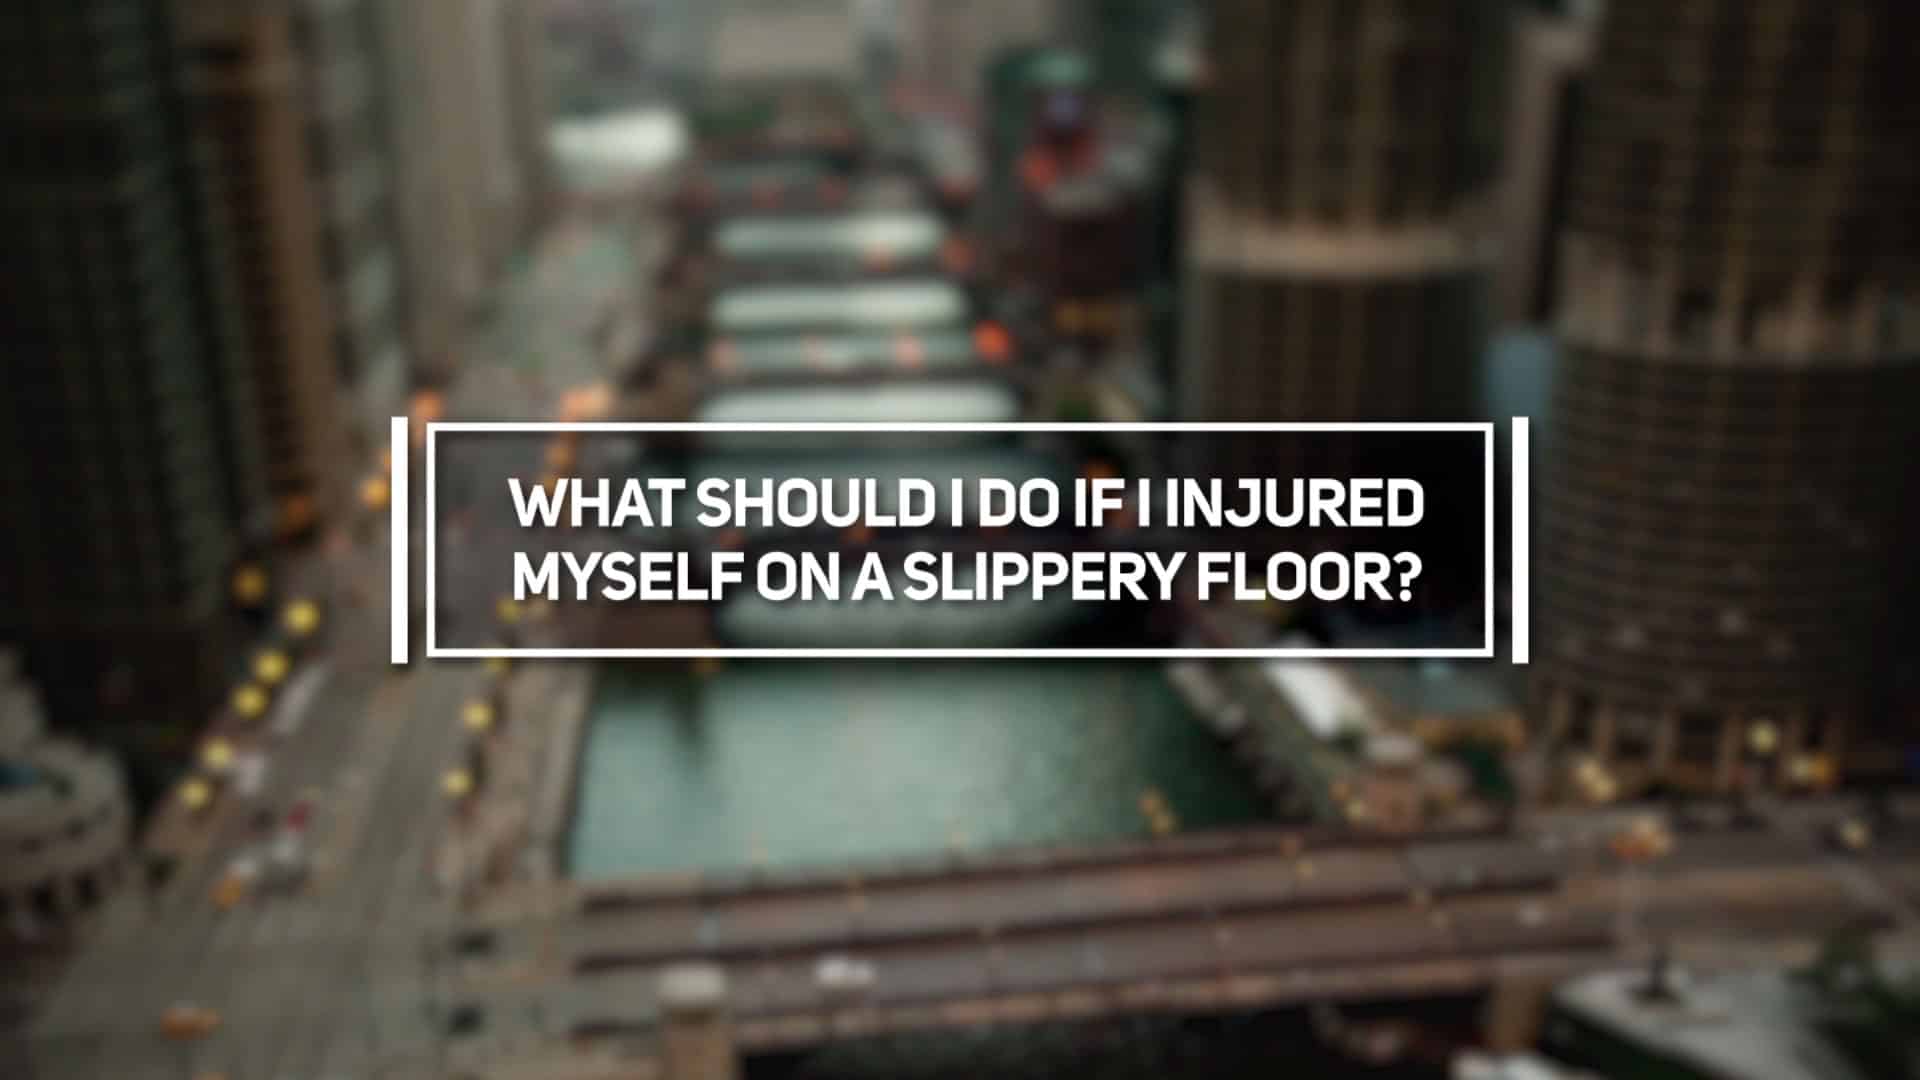 What Should I Do if I Injured Myself on a Slippery Floor?